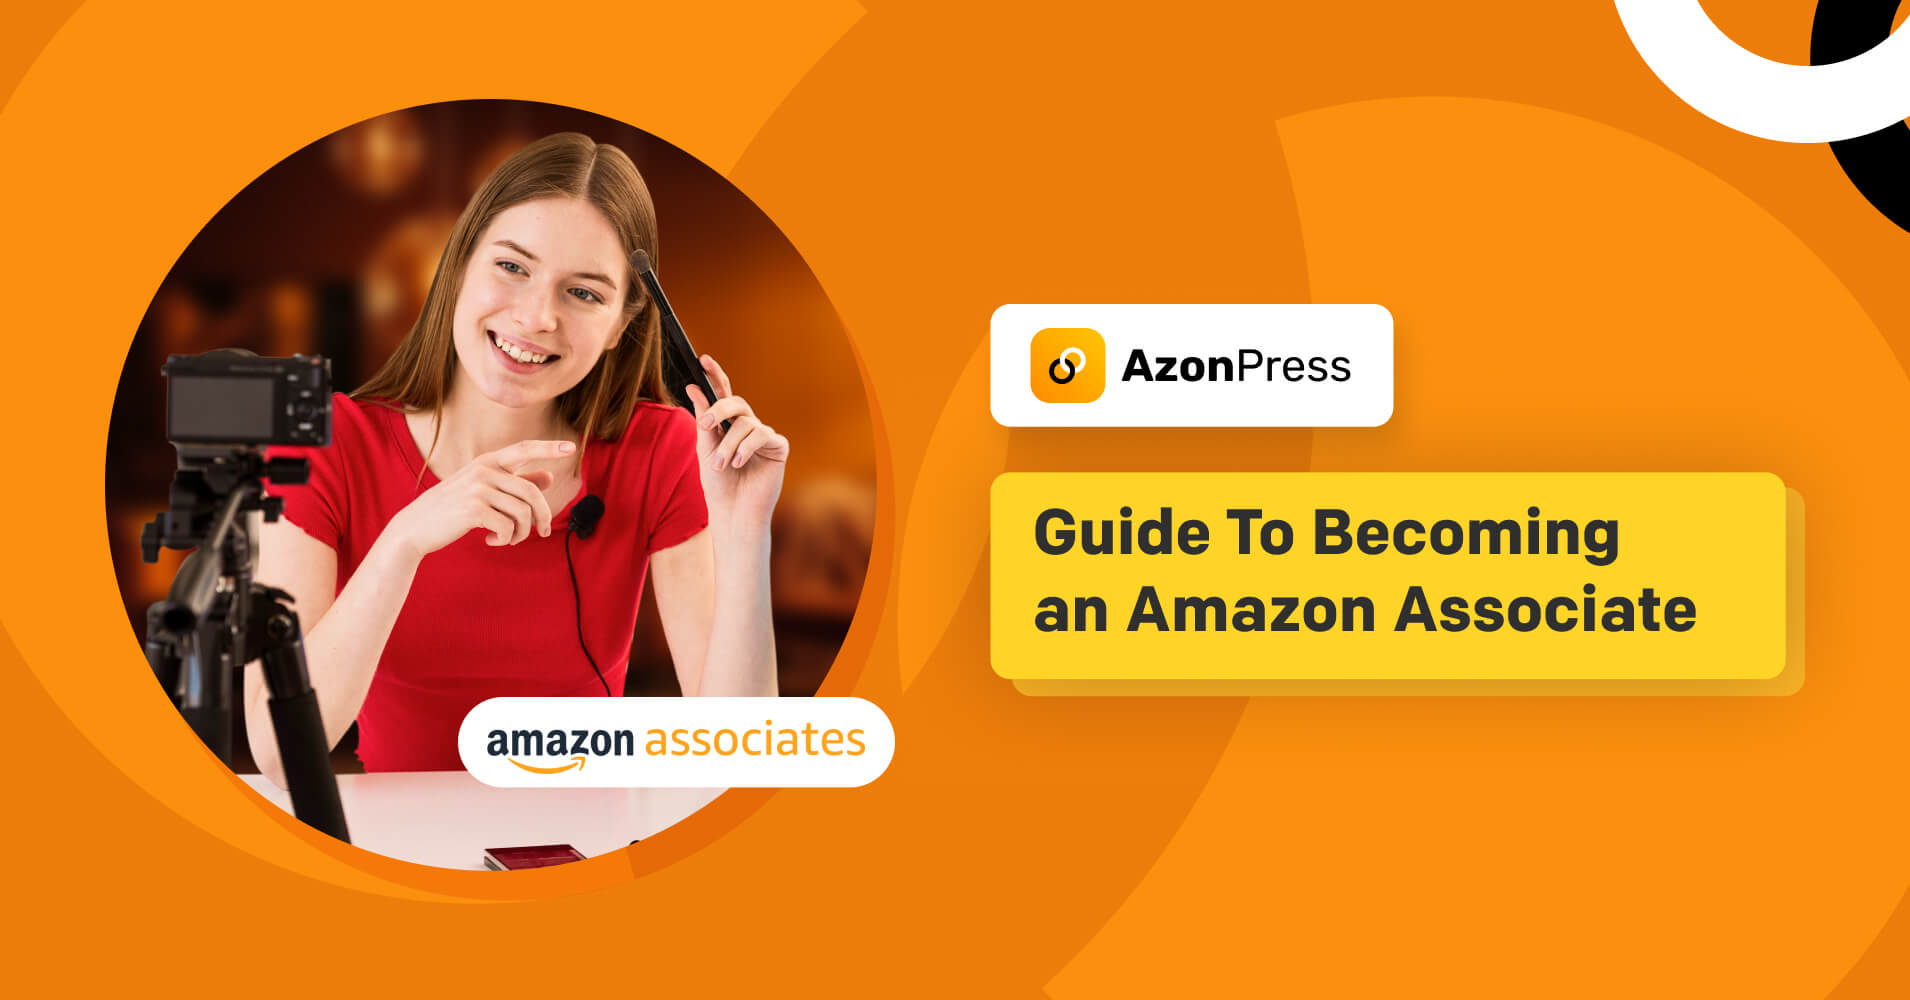 Guide To Becoming an Amazon Associate